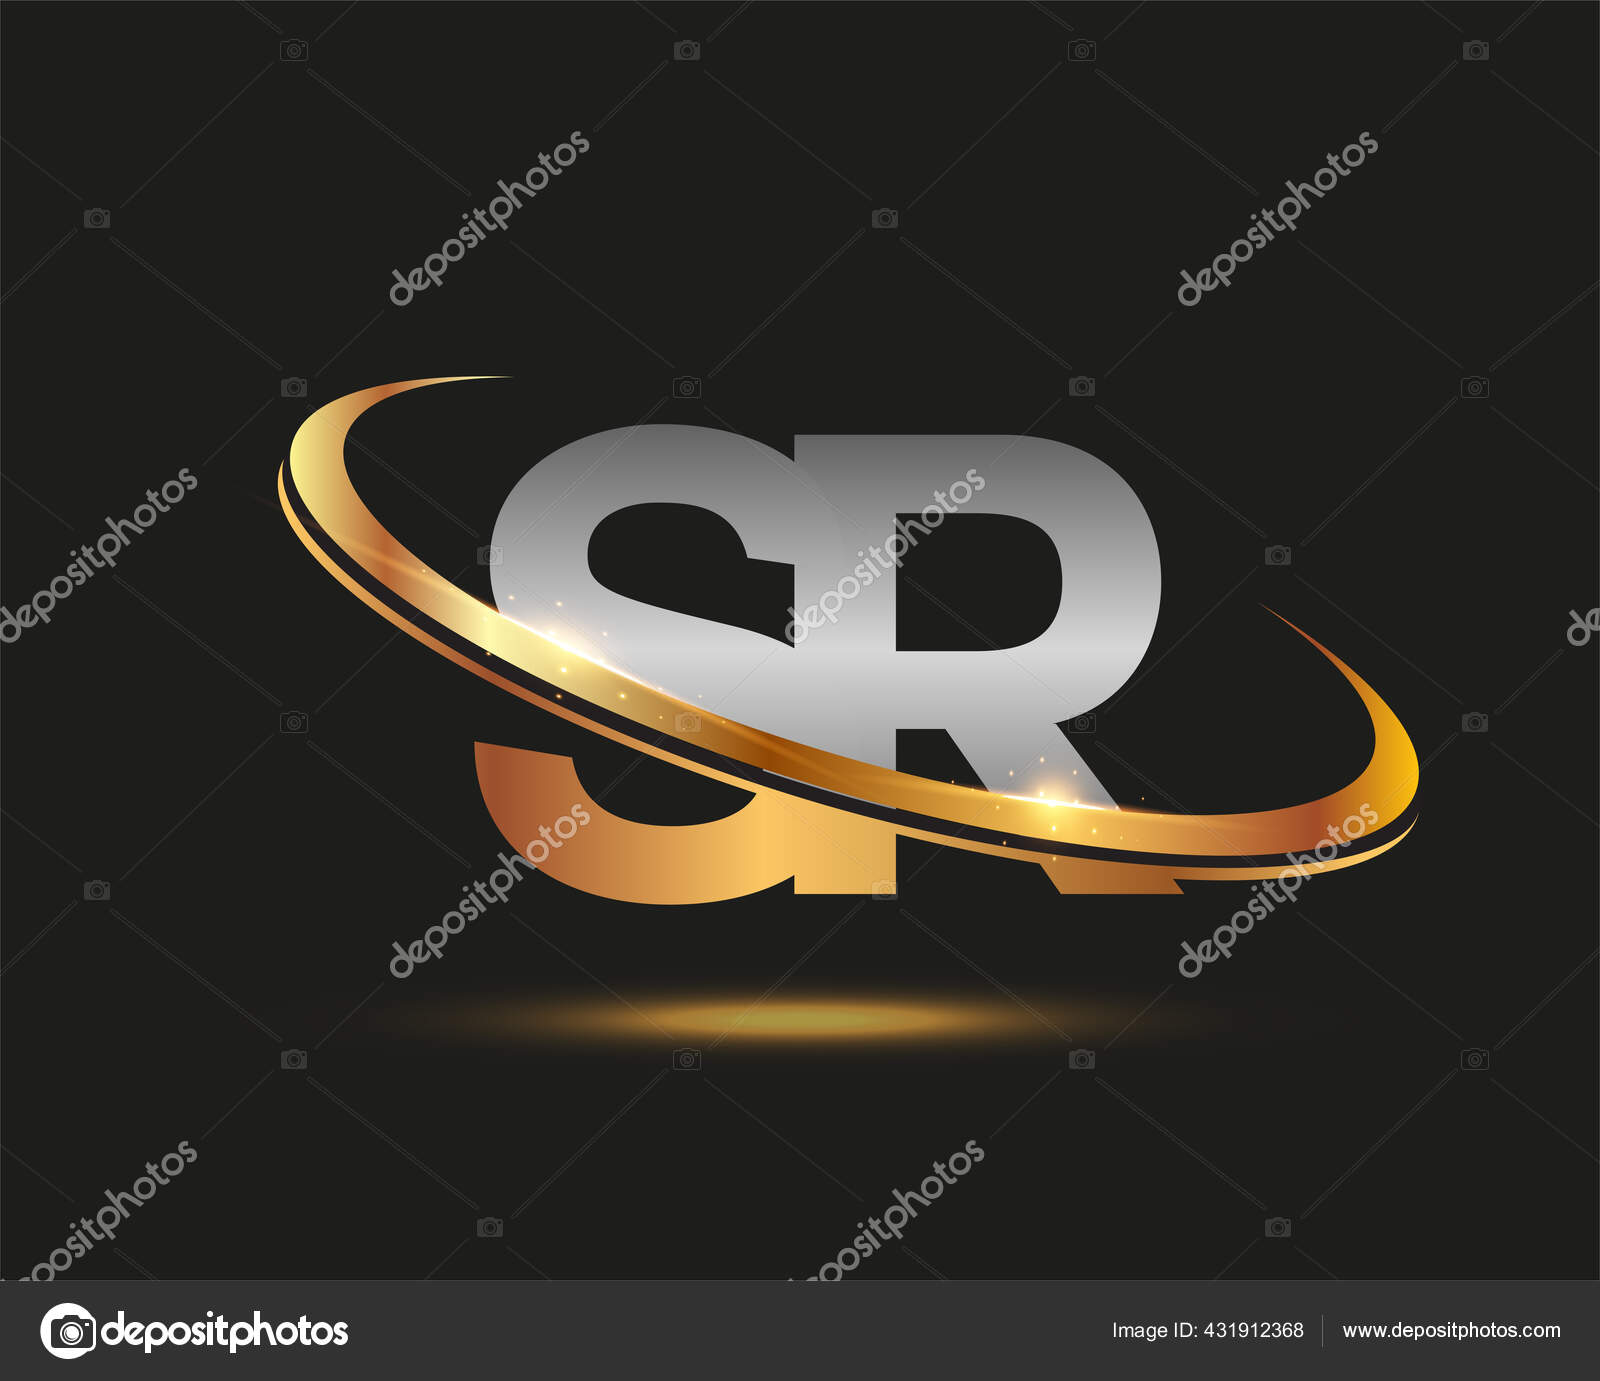 695 Rr Gold Logo Images, Stock Photos, 3D objects, & Vectors | Shutterstock